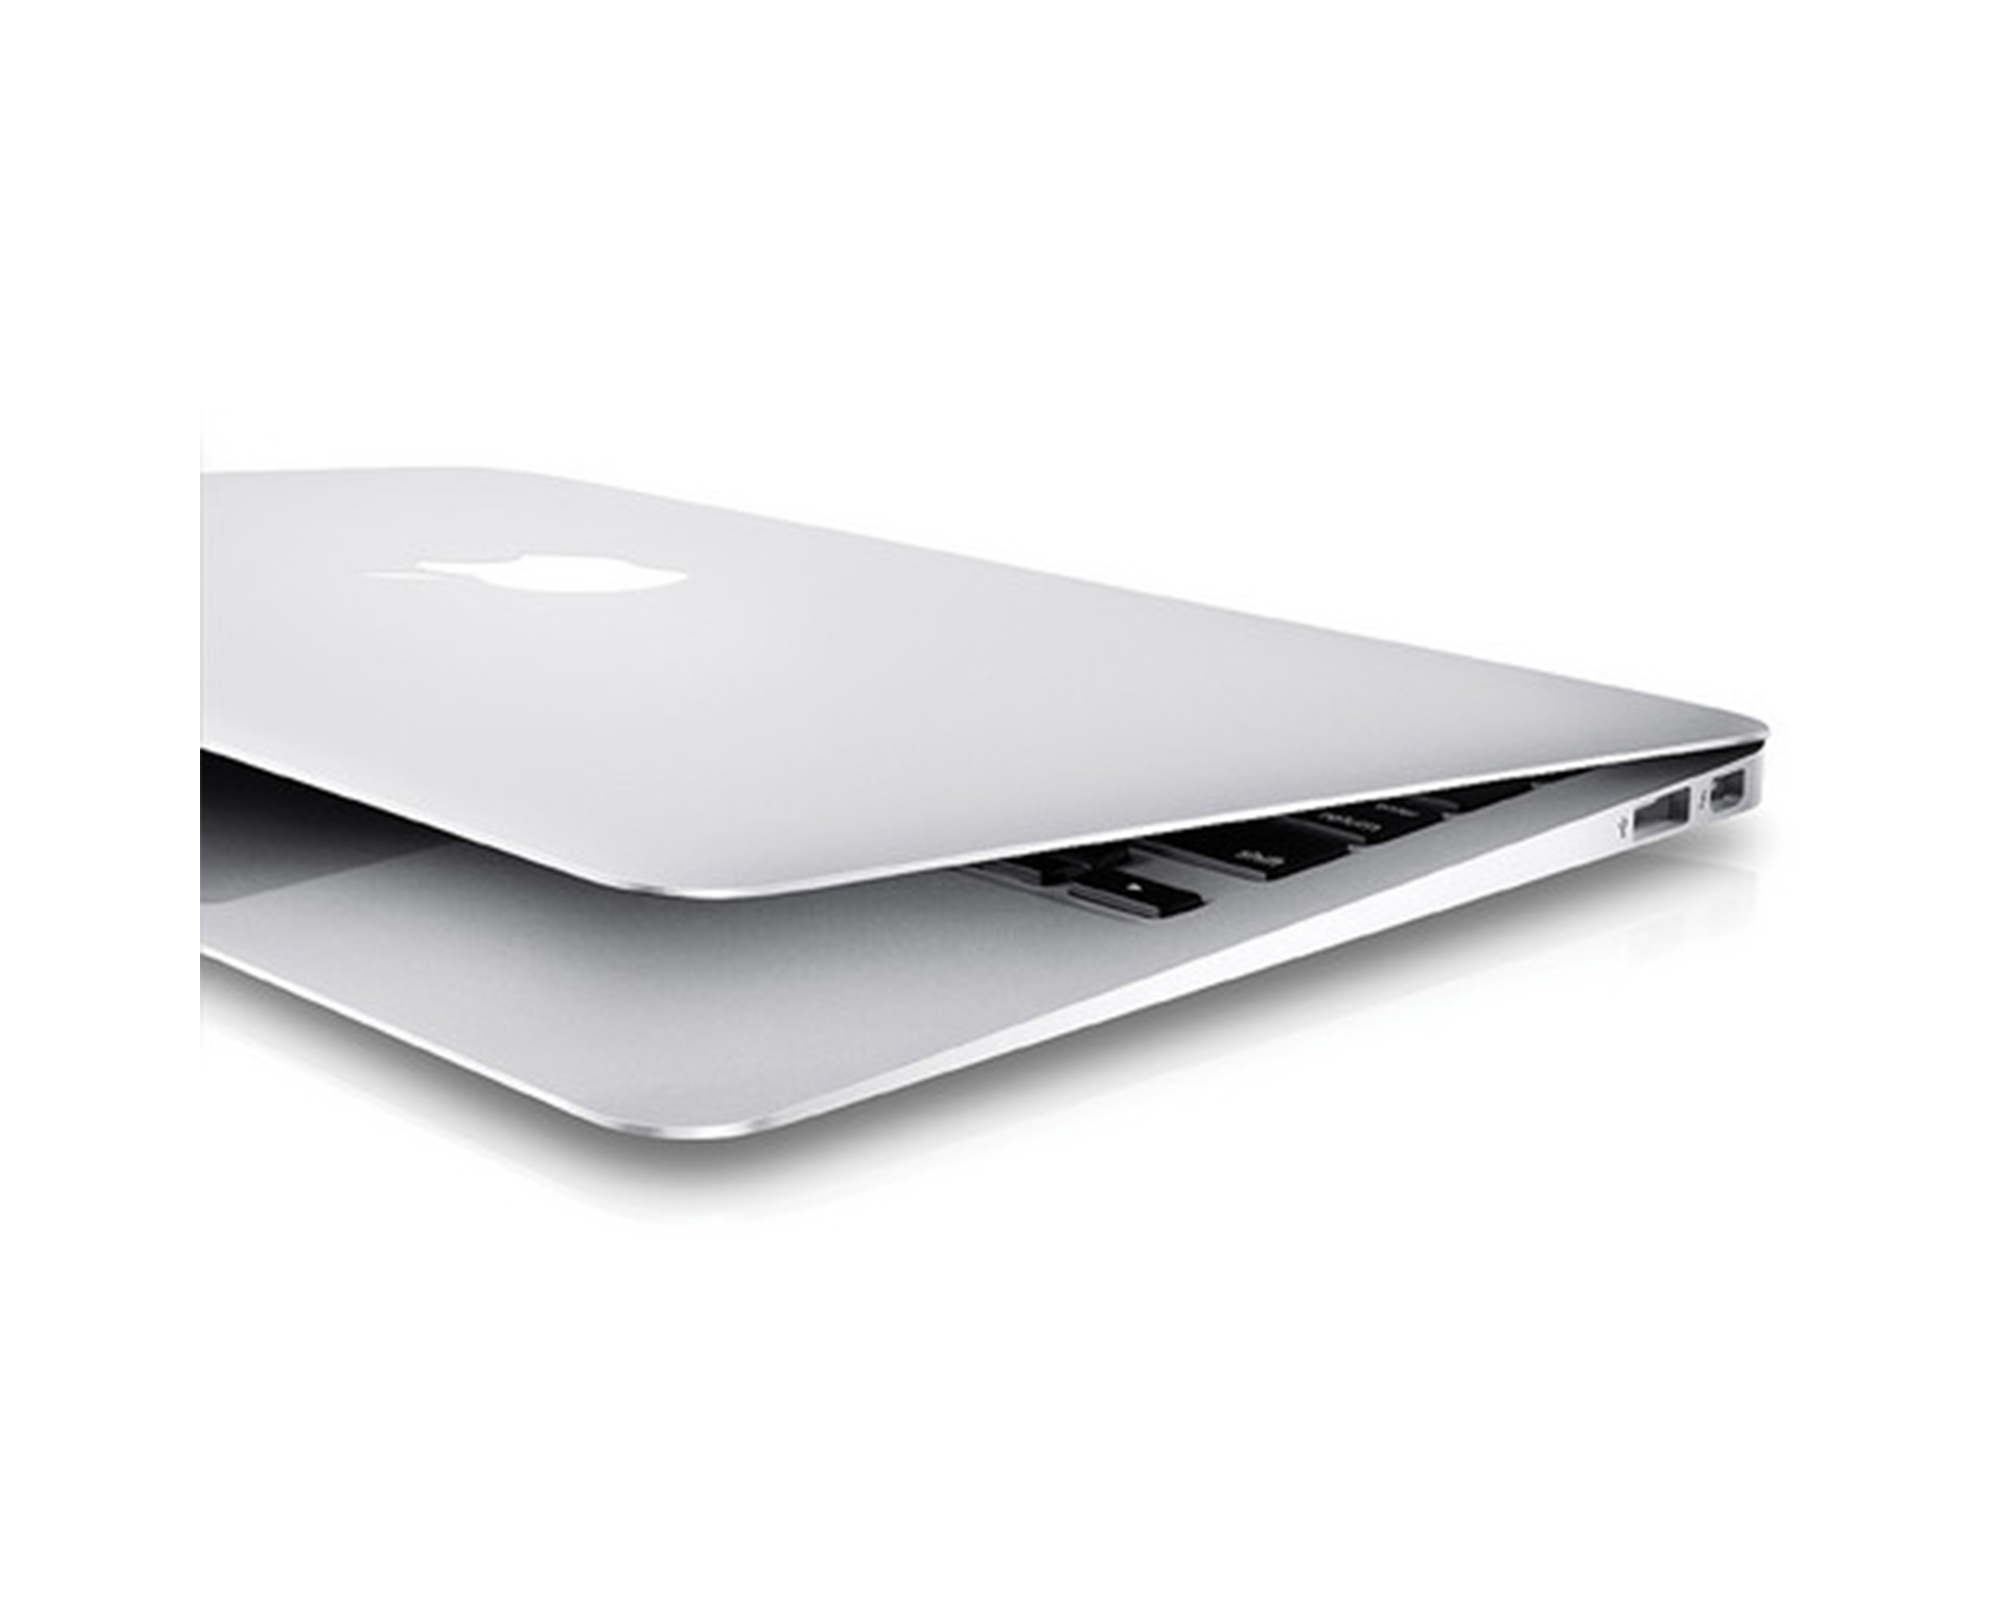 Restored 13" Apple MacBook Air 1.8GHz Dual Core i5 4GB Memory / 256GB SSD (Turbo Boost to 2.8GHz) (Refurbished) - image 3 of 5